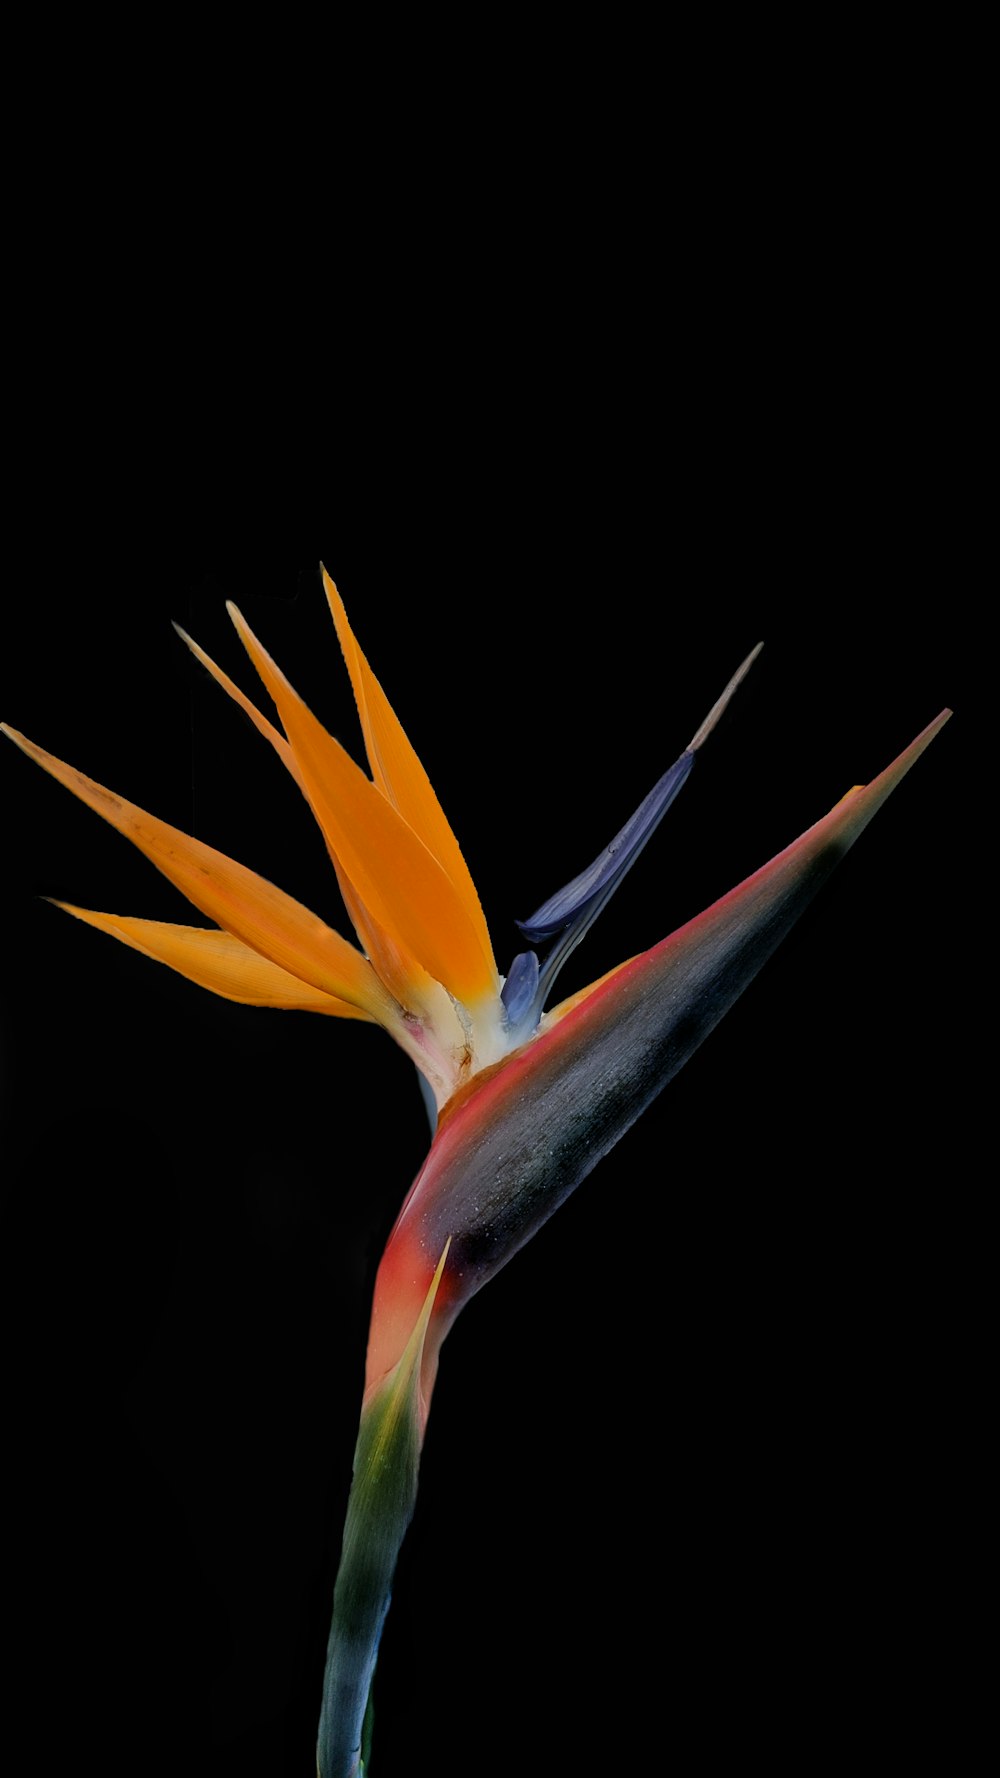 yellow and red birds of paradise flower in bloom